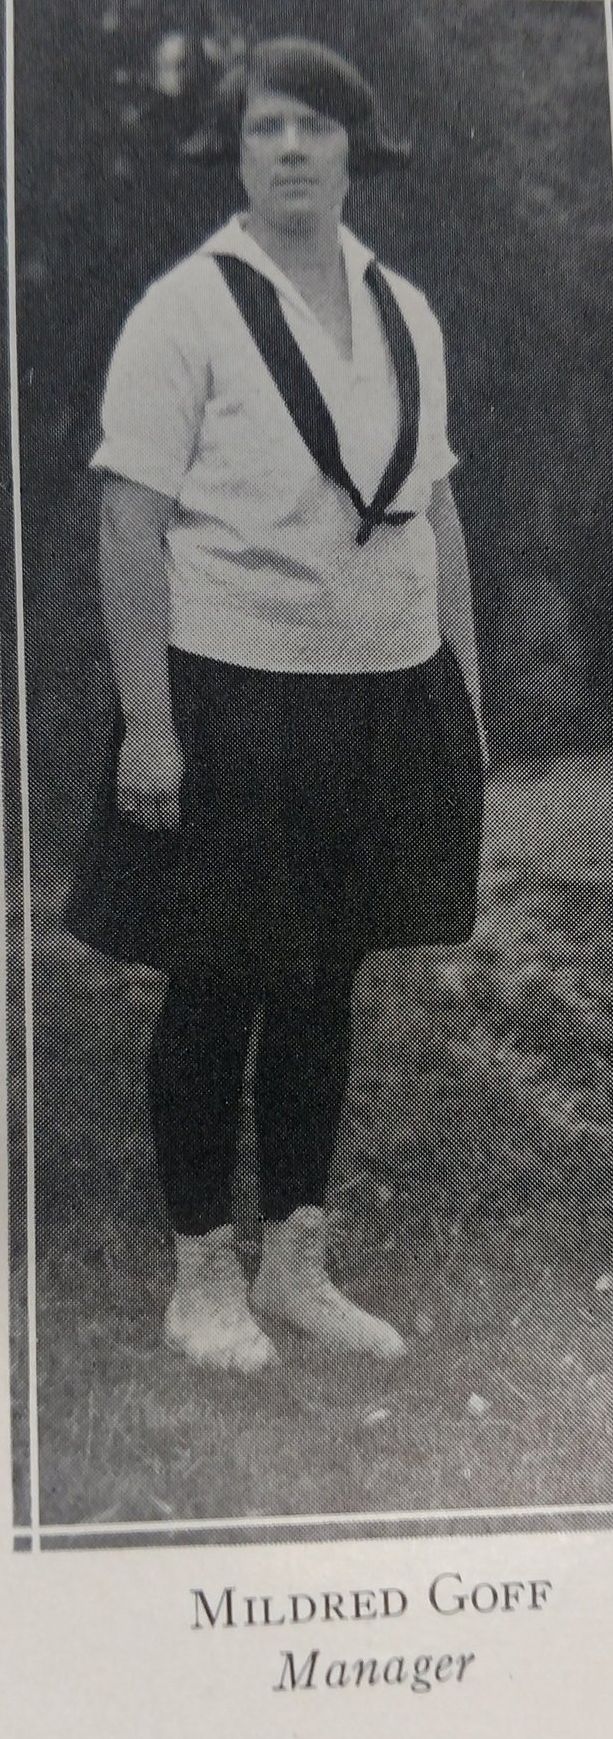 Mildred Goff tennis manager mid 20's